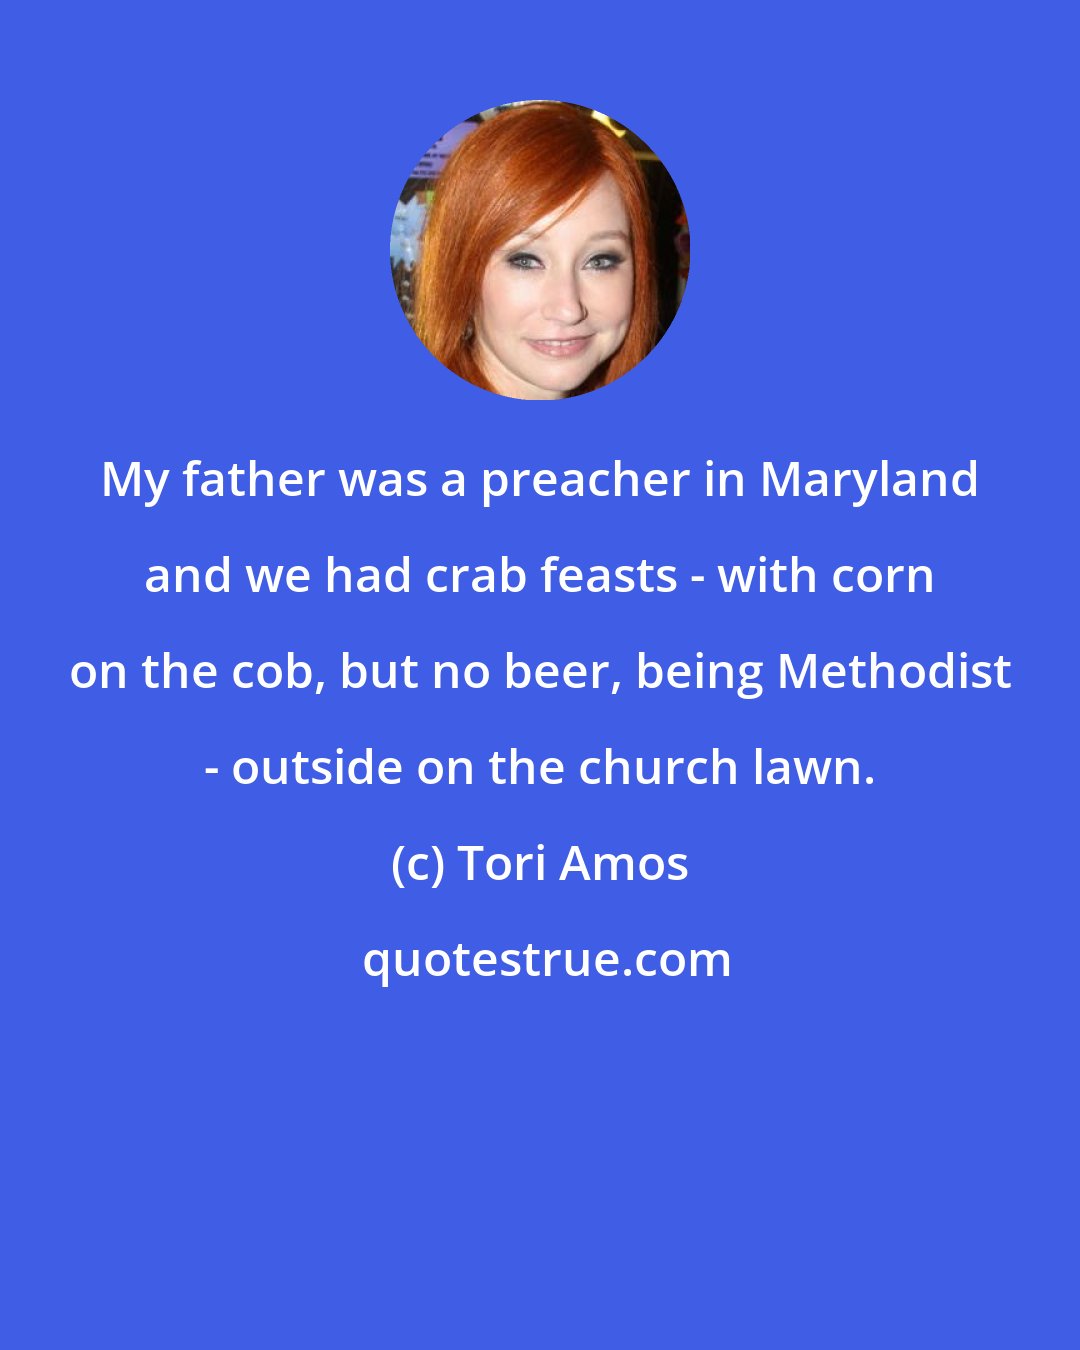 Tori Amos: My father was a preacher in Maryland and we had crab feasts - with corn on the cob, but no beer, being Methodist - outside on the church lawn.